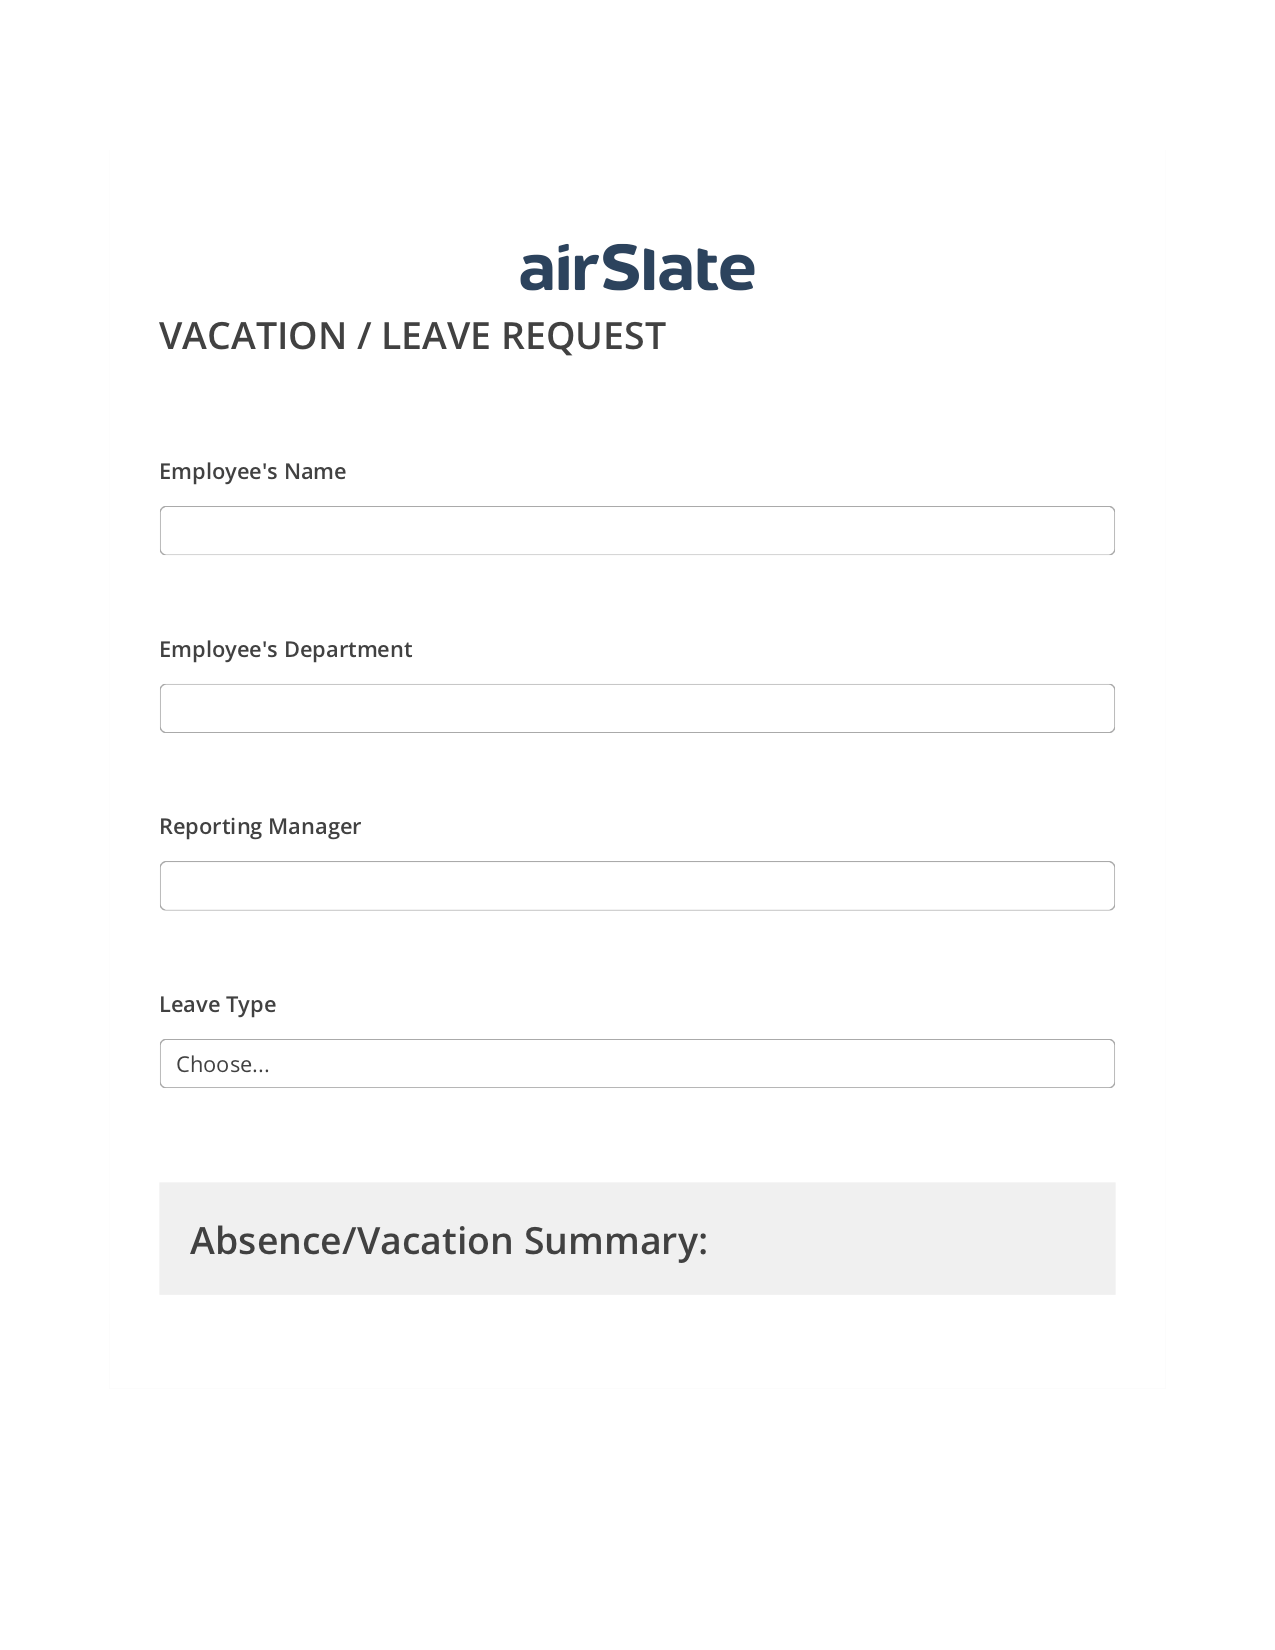 Vacation/Leave Request Workflow Pre-fill Dropdowns from Excel Bot, Export to MS Dynamics 365 Bot, Archive to Google Drive Bot